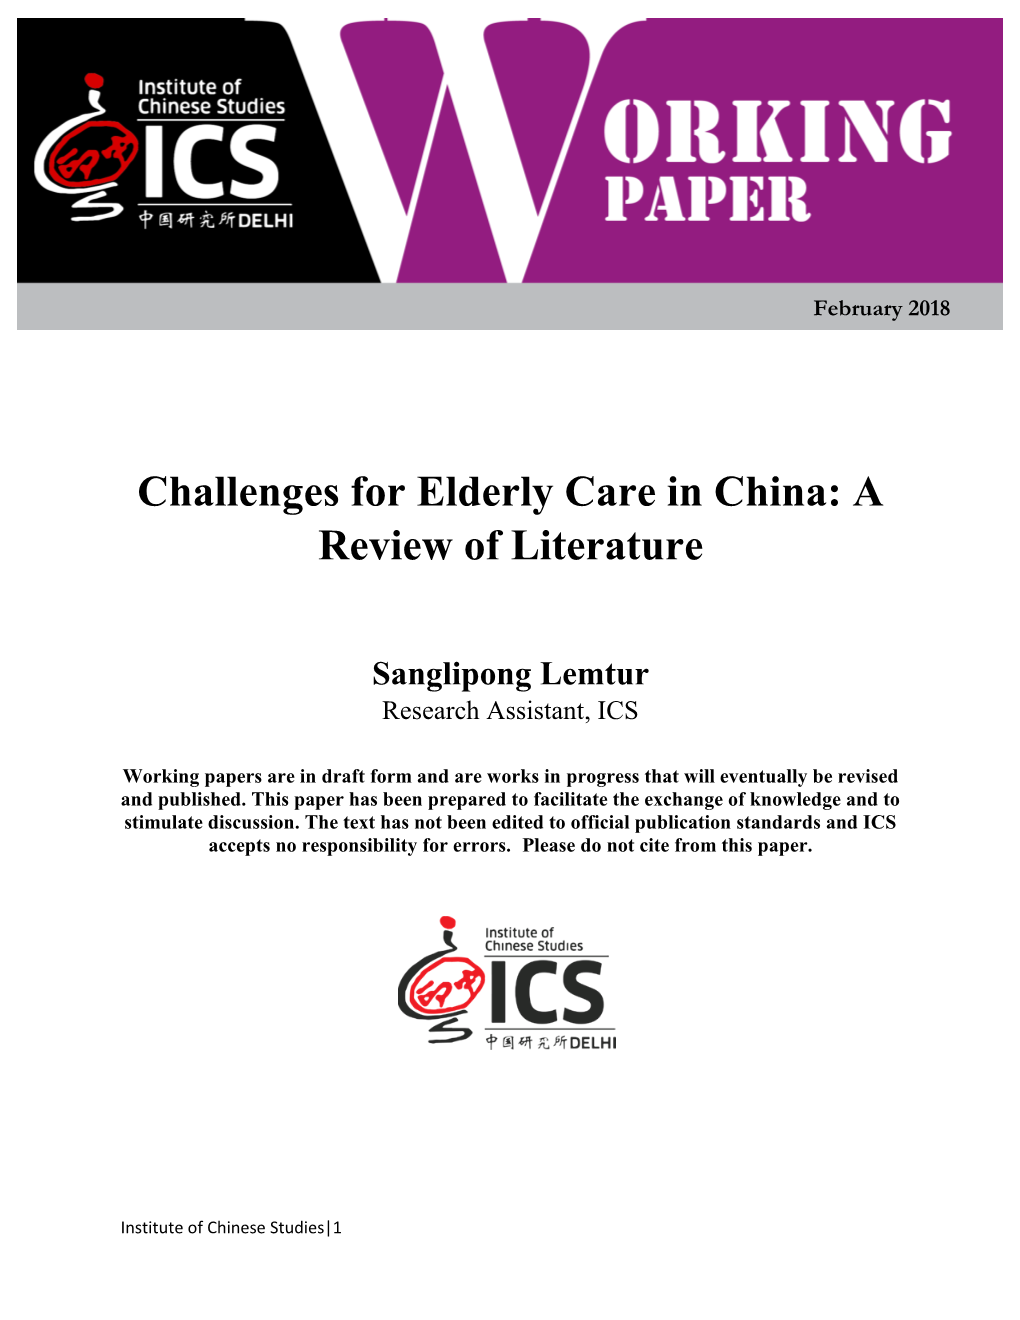 Challenges for Elderly Care in China: a Review of Literature